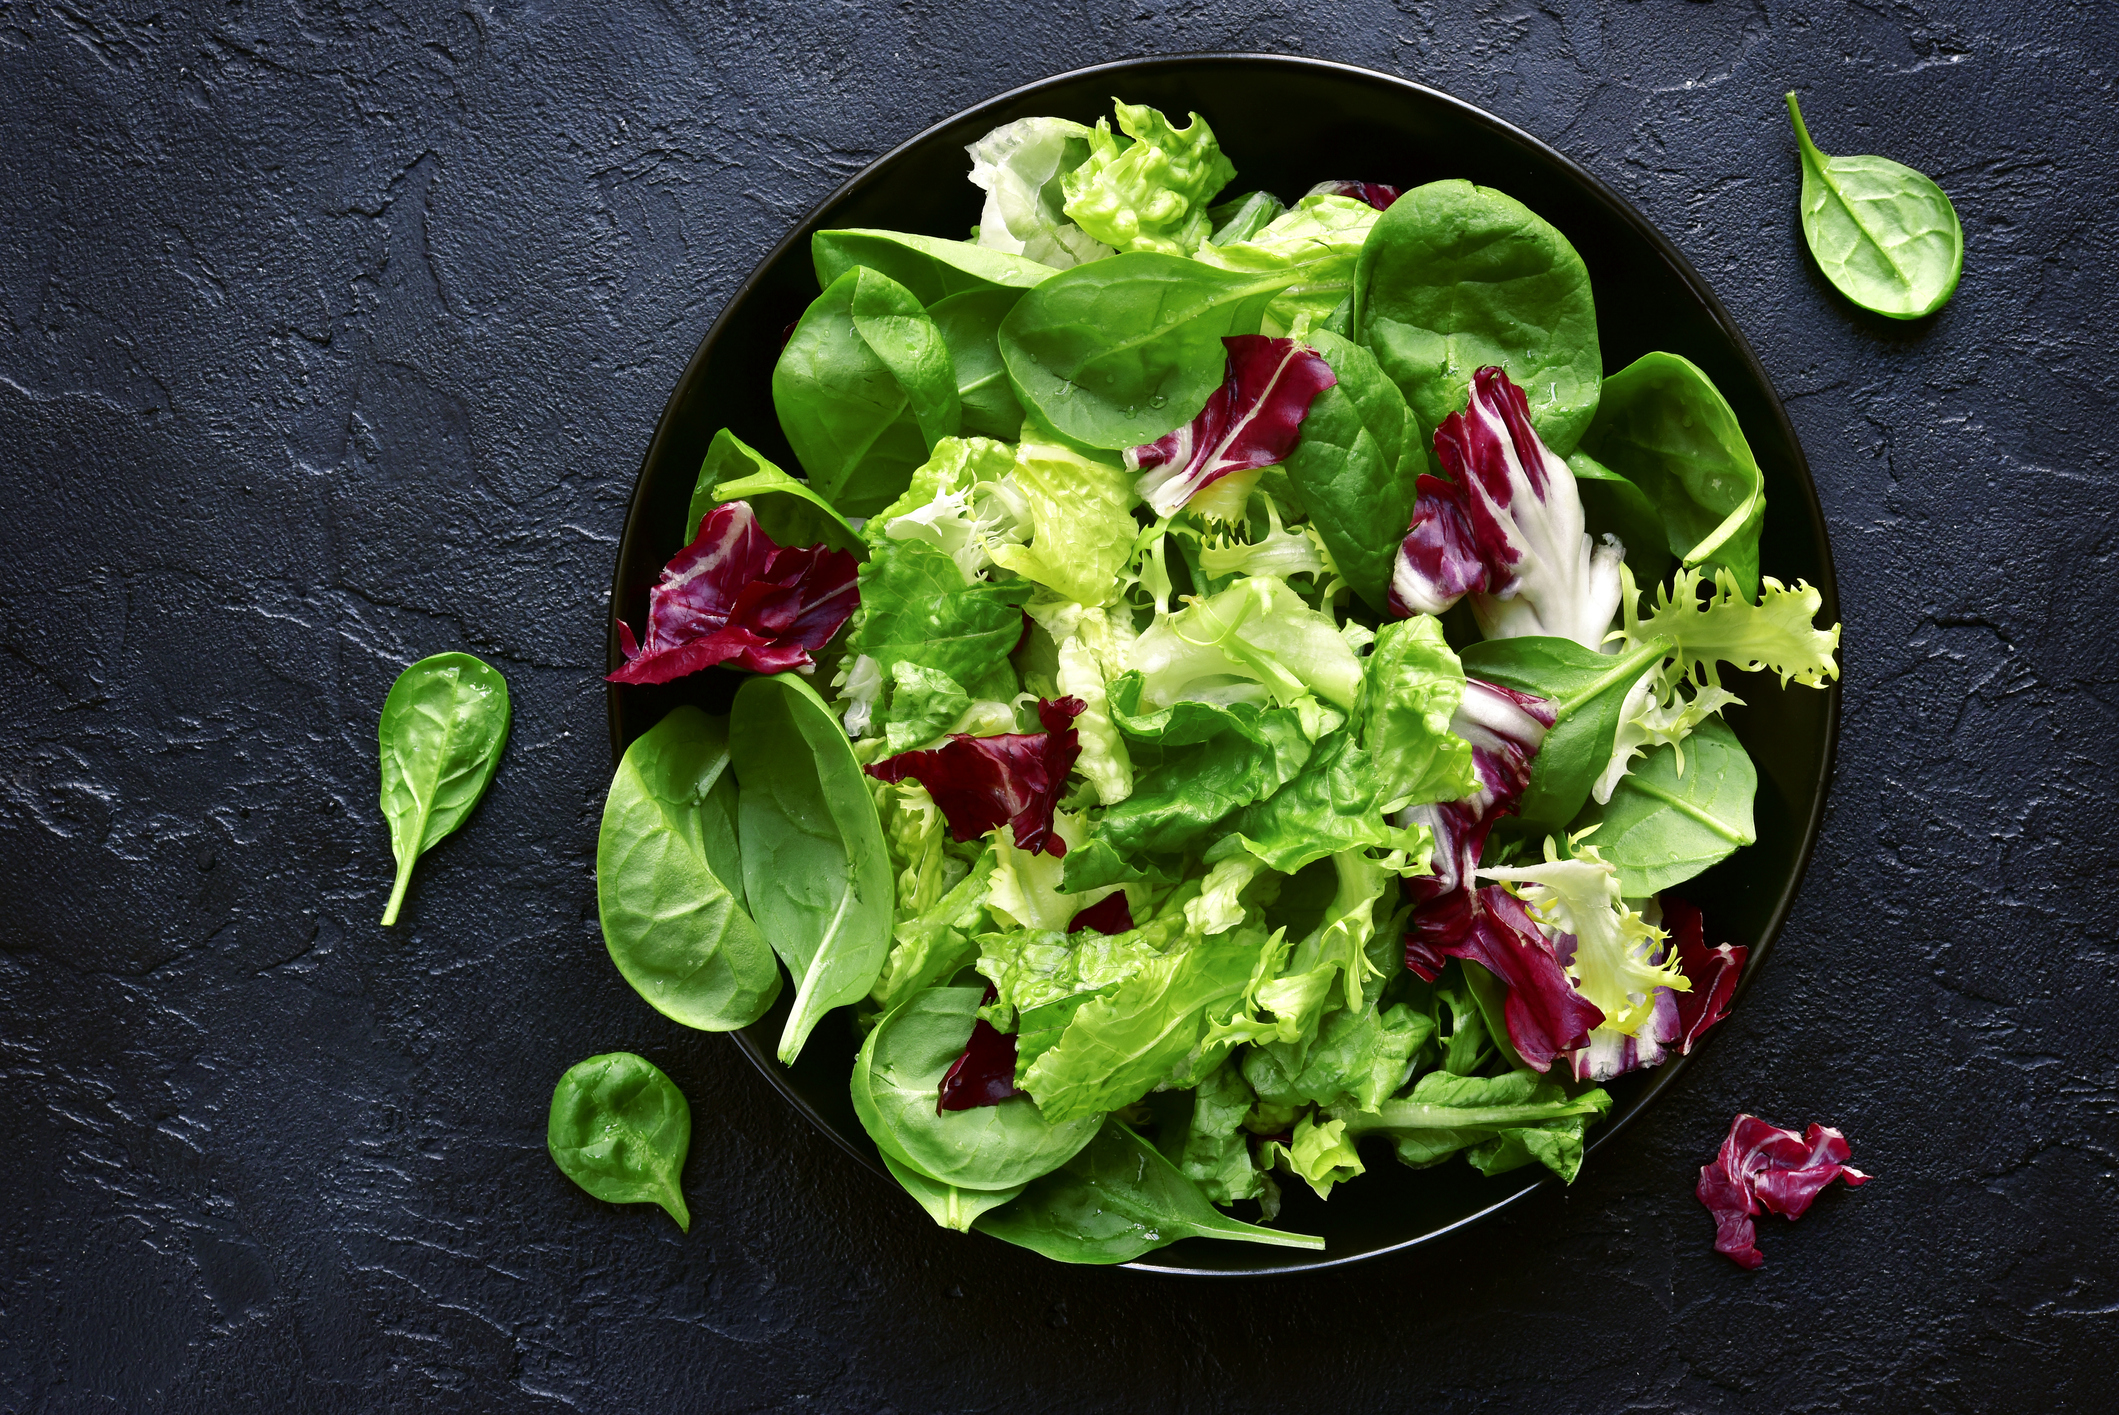 Are Leafy Greens the Fountain of Youth?